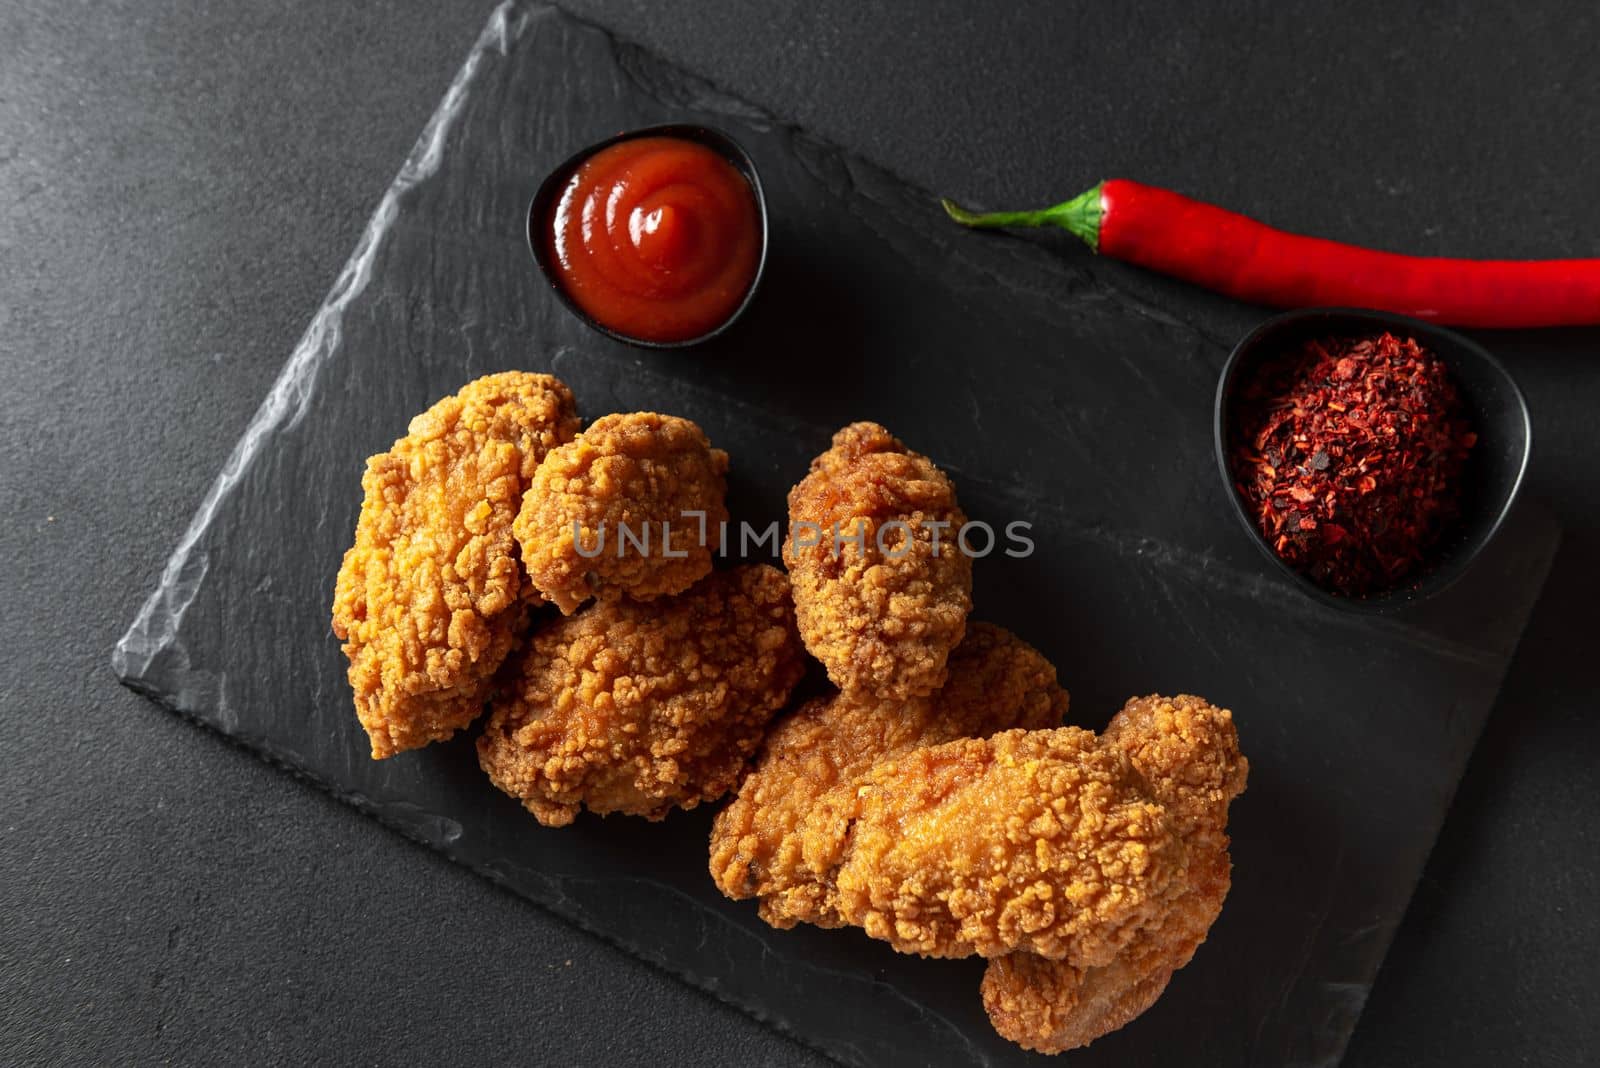 Spicy fried chicken in crispy breading. Black background. Top view. Copy space.